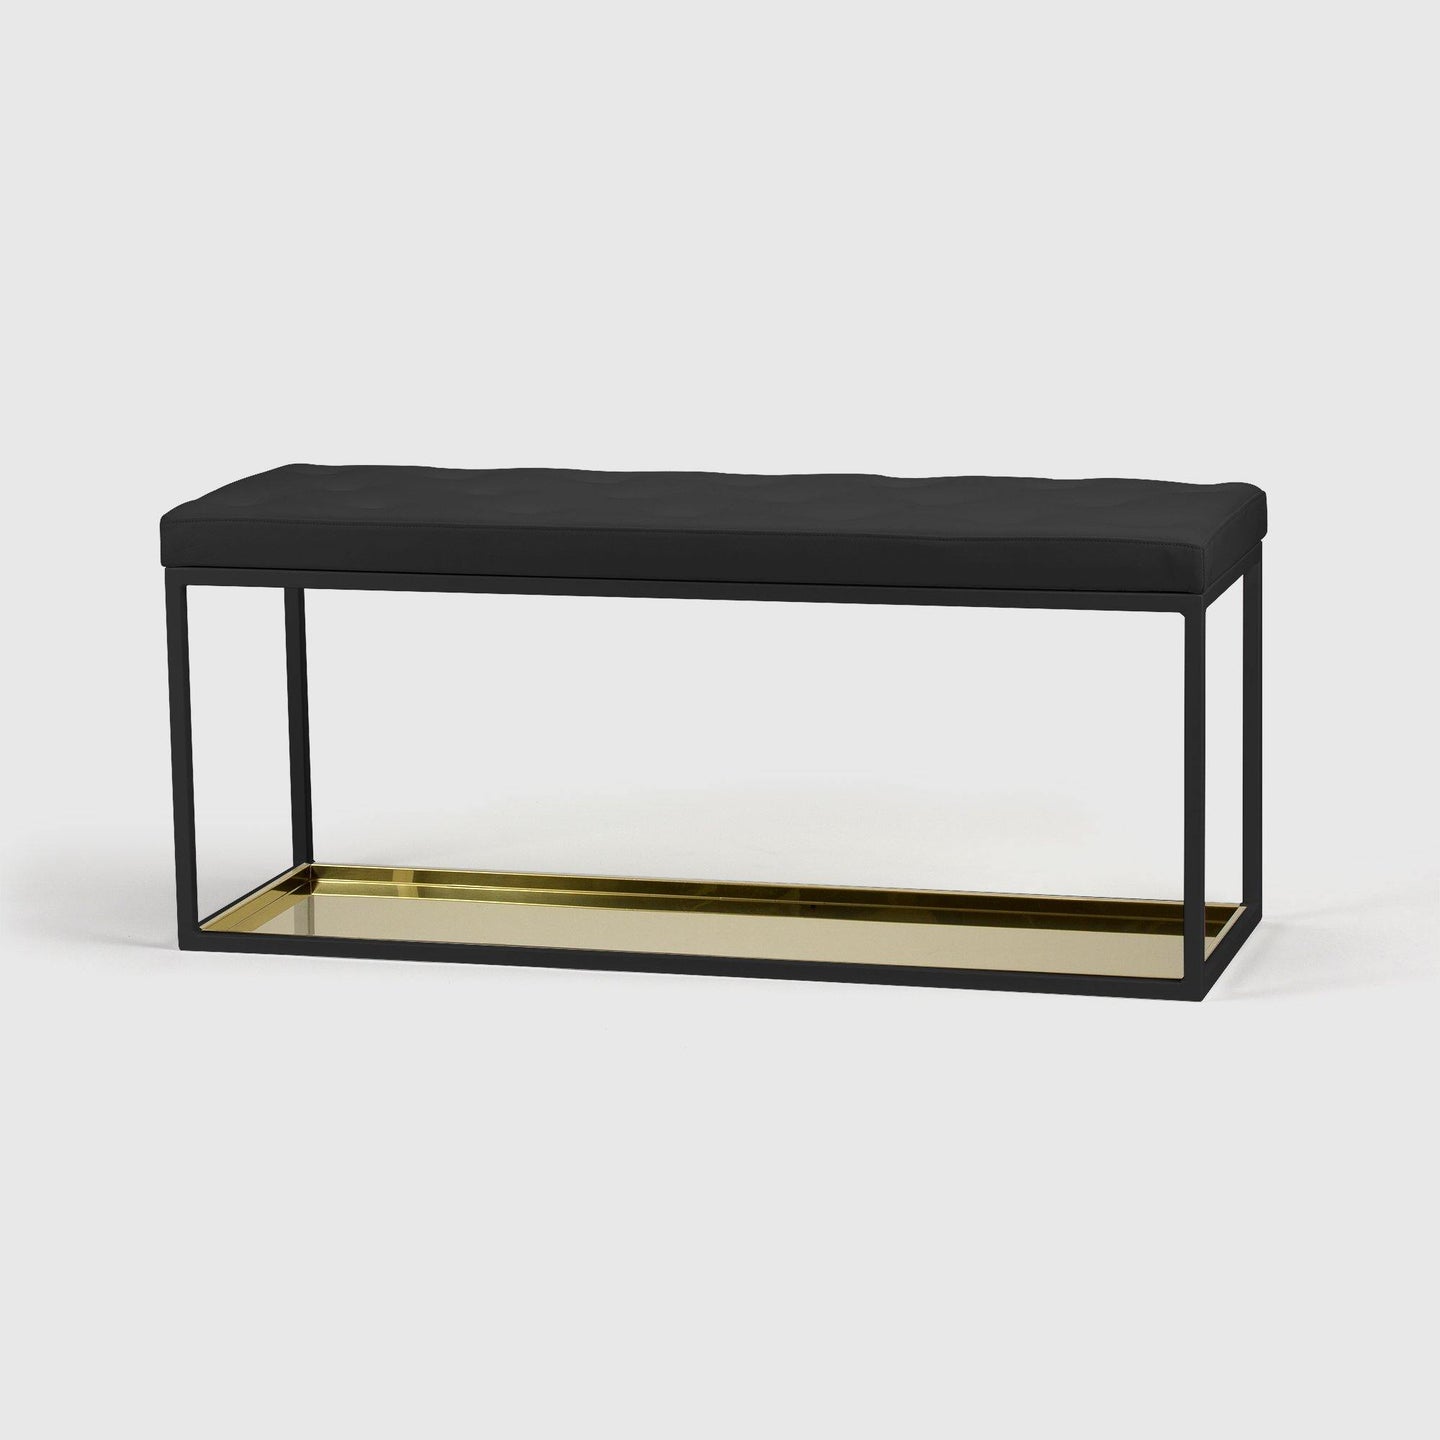 Bench 11 in black, black leather and brass, Scherlin Form,  image 